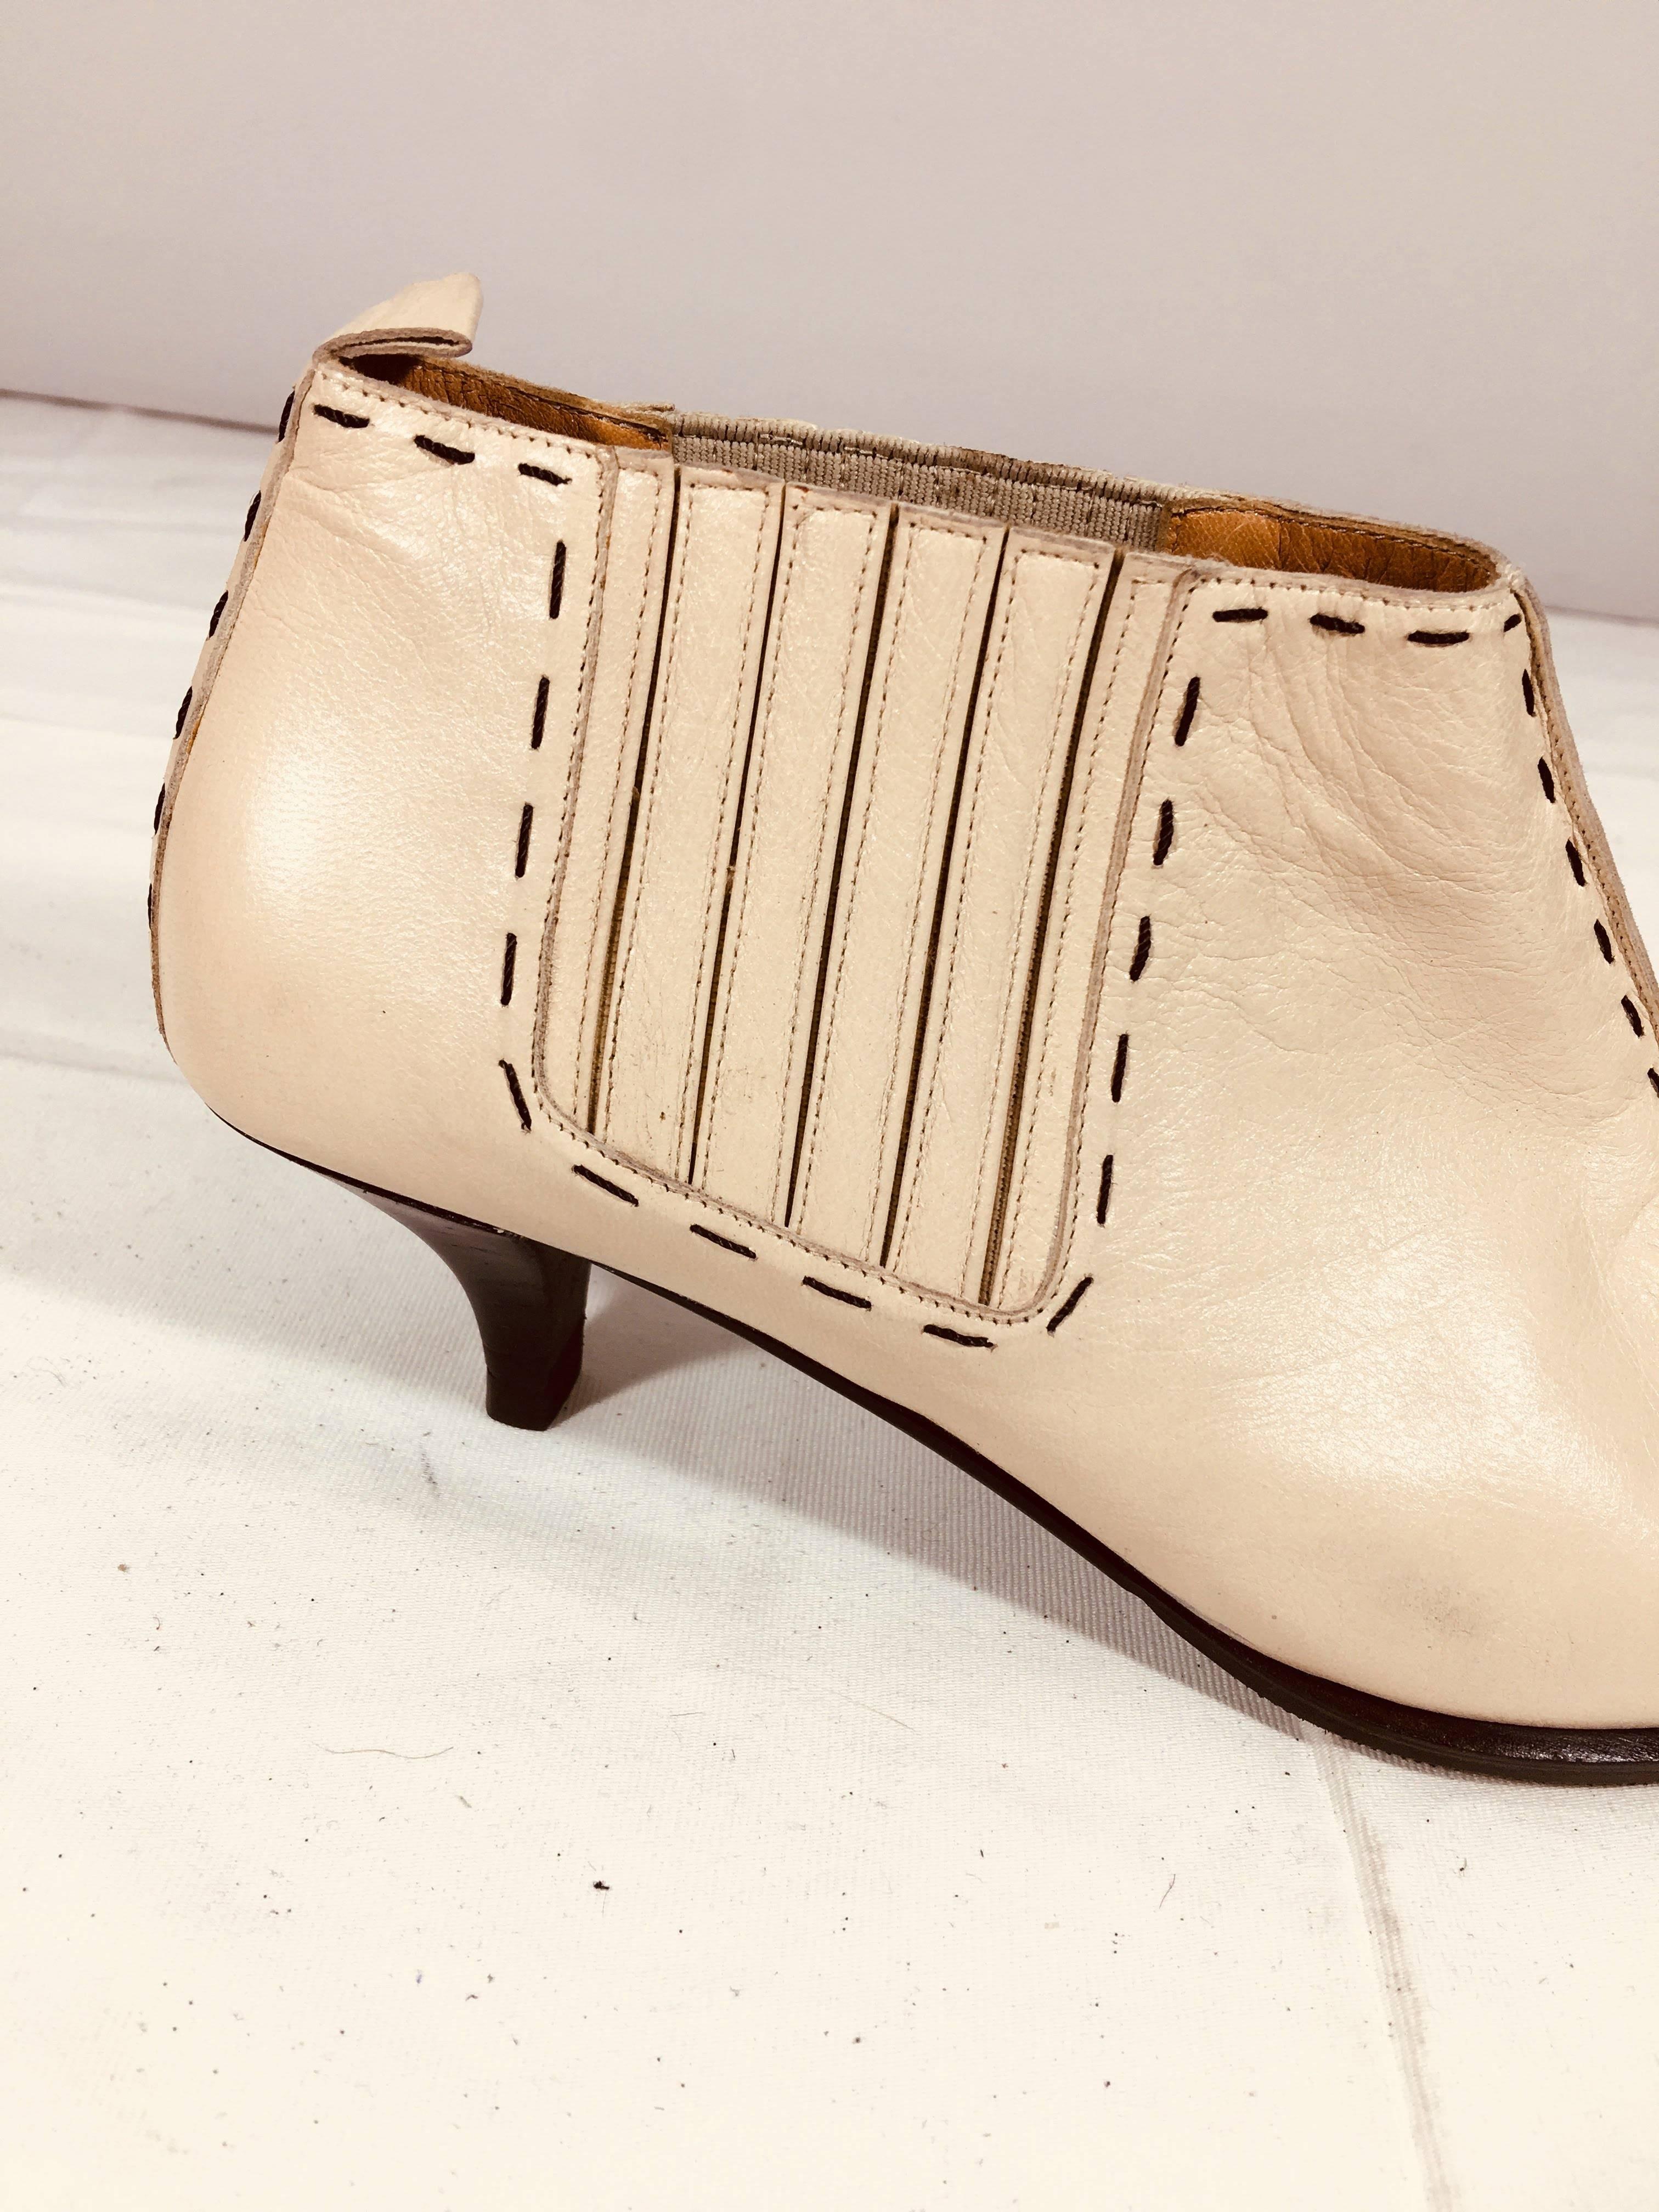 Hermes Slip On Ankle Boots. Pointed Toe with Black Stitching and Kitten Heels in Beige Leather.